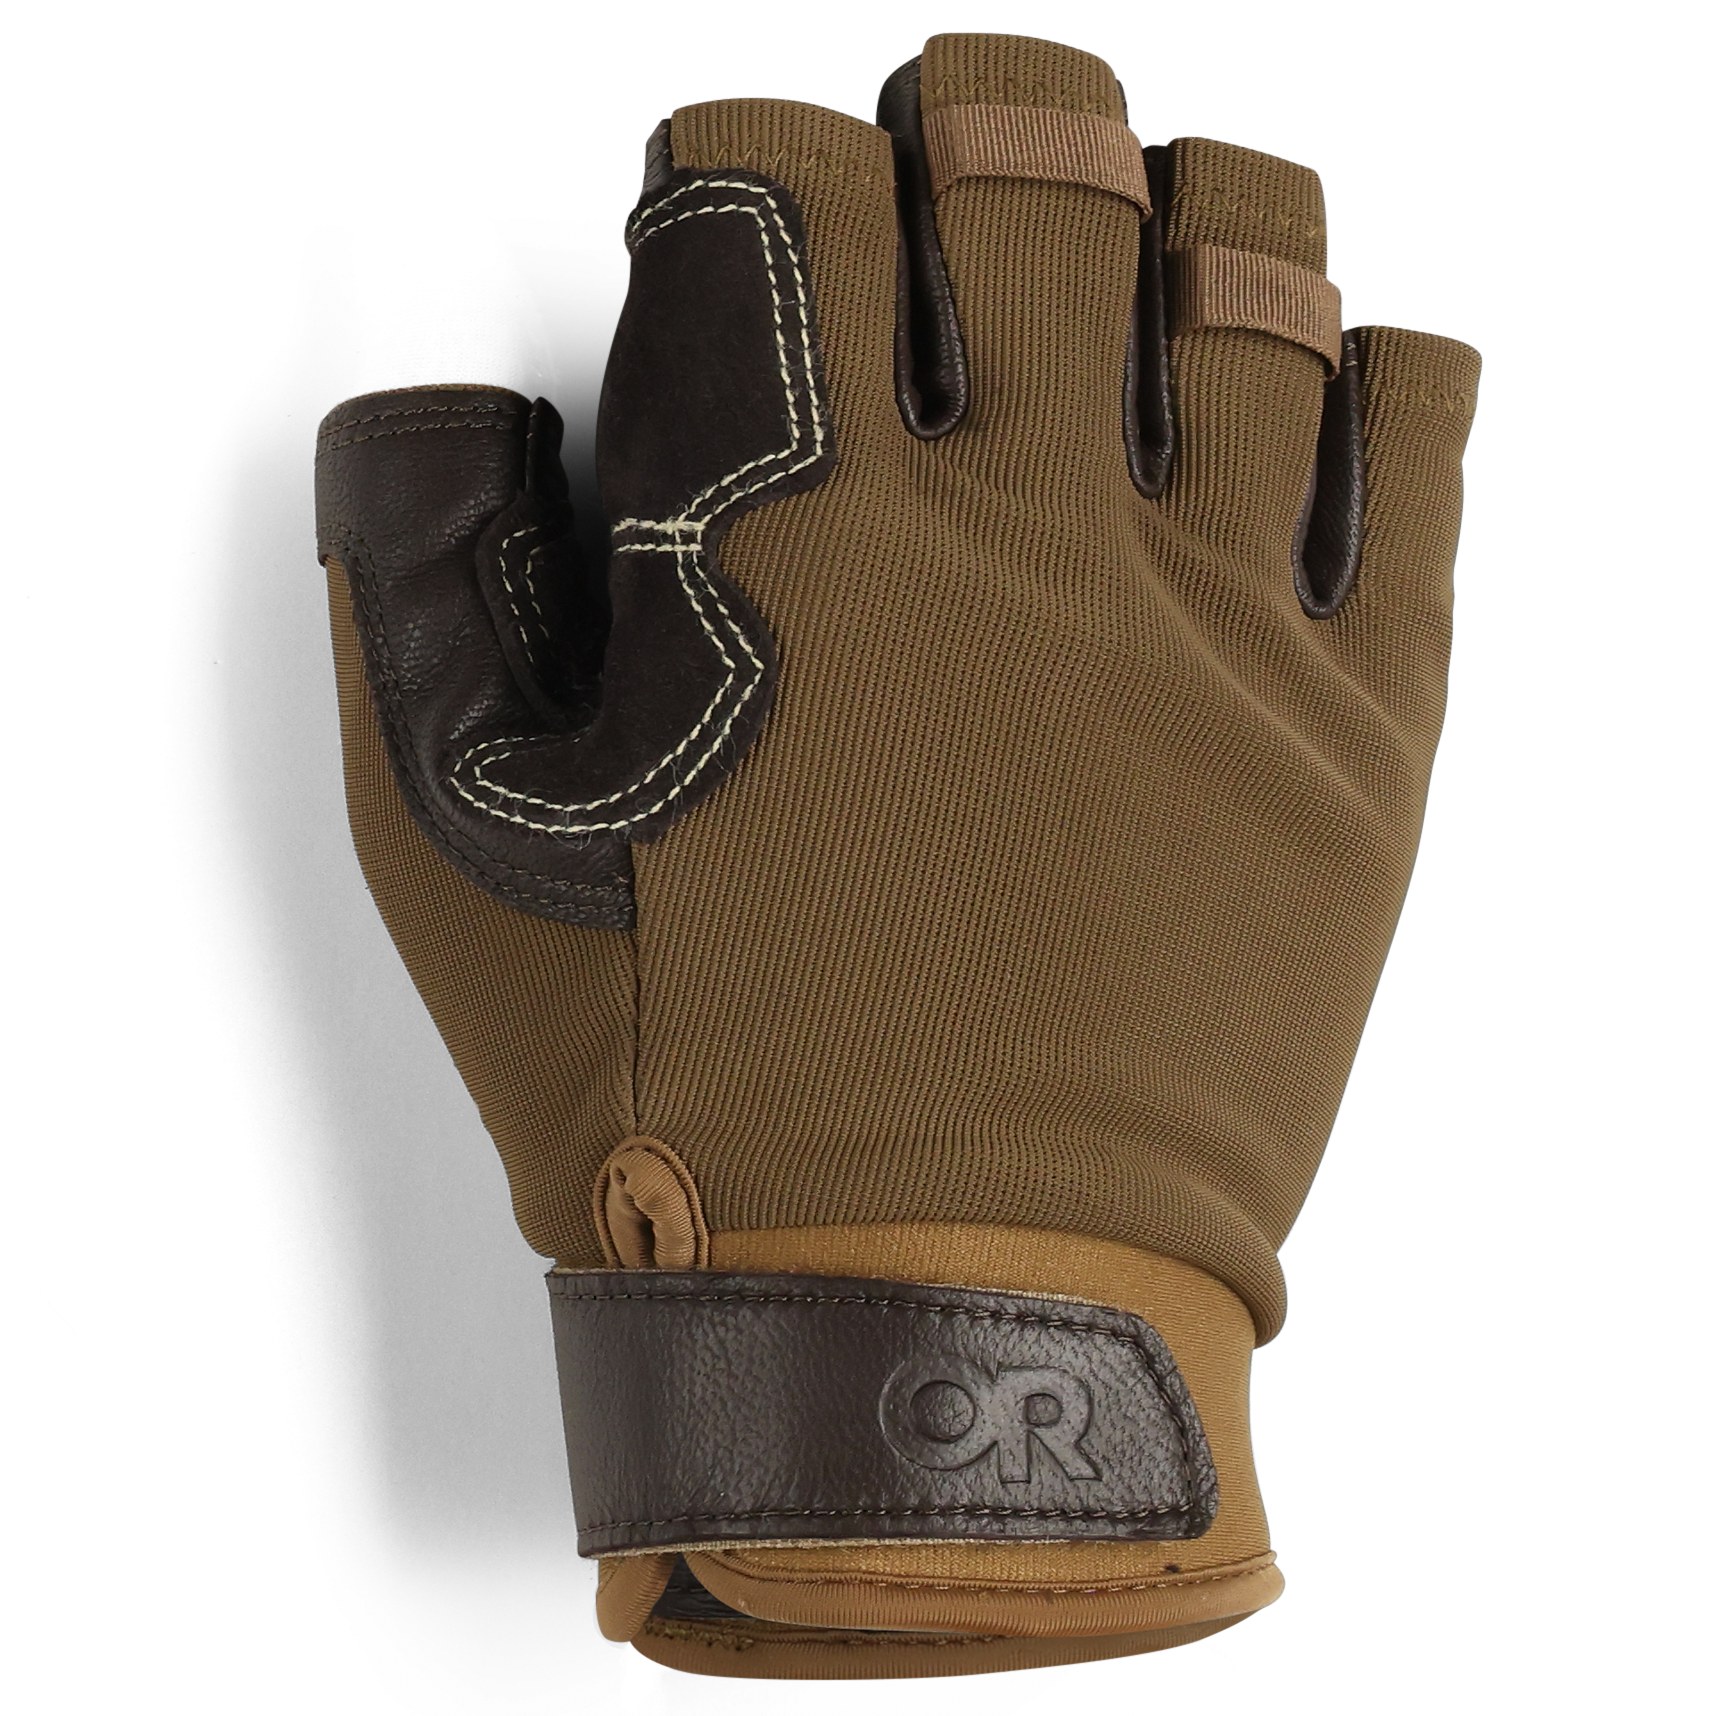 Foto de Outdoor Research Guantes - Fossil Rock II - coyote/chocolate